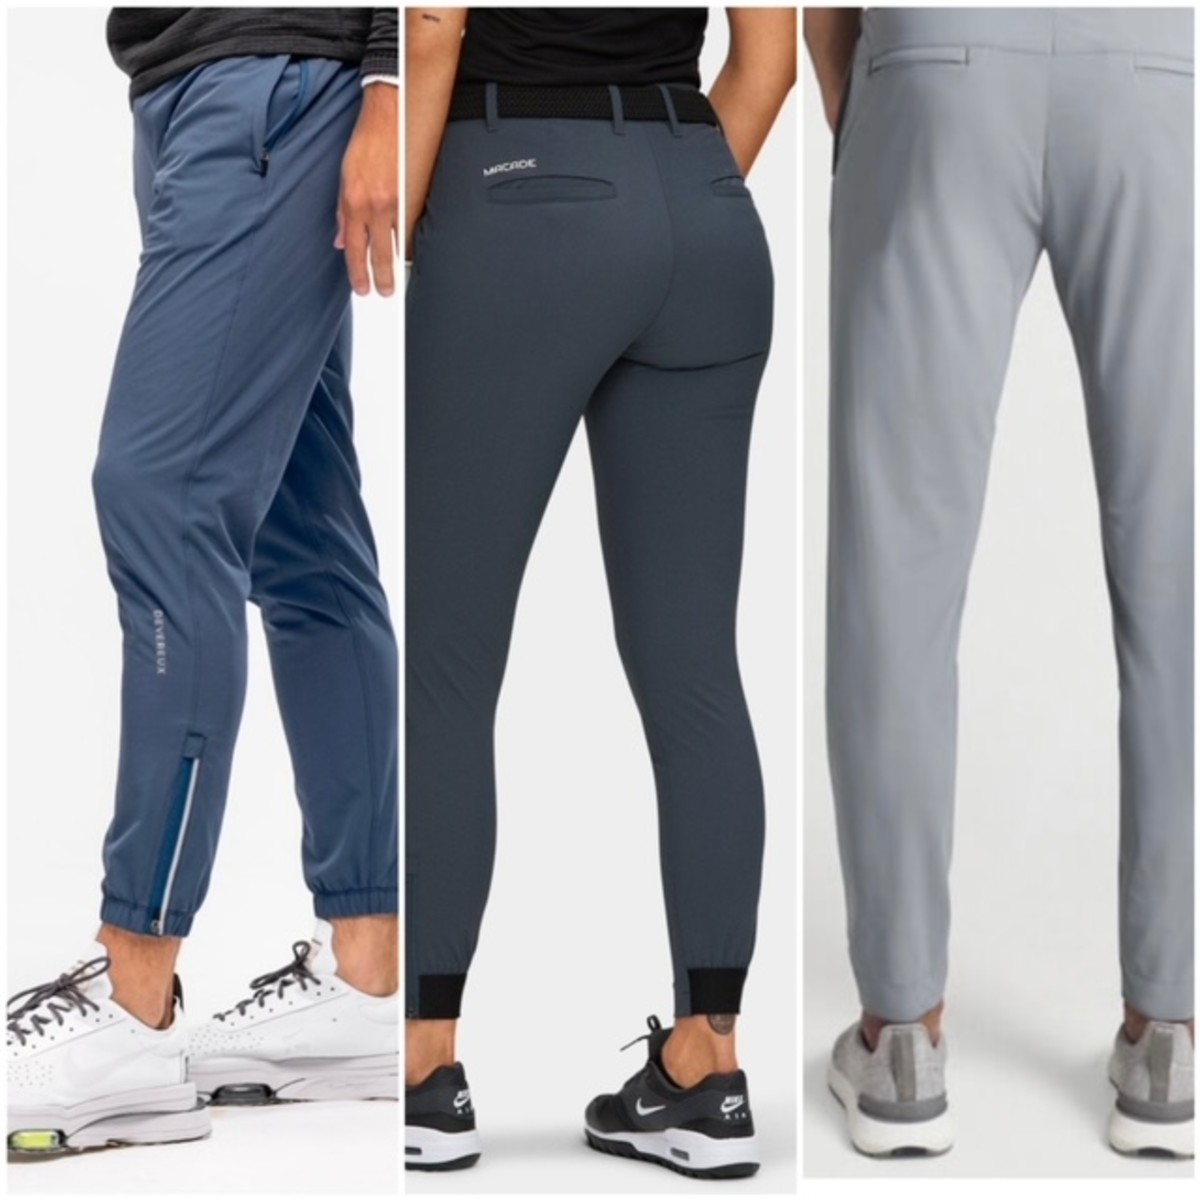 What's New in Fall Golf Fashion - Sports Illustrated